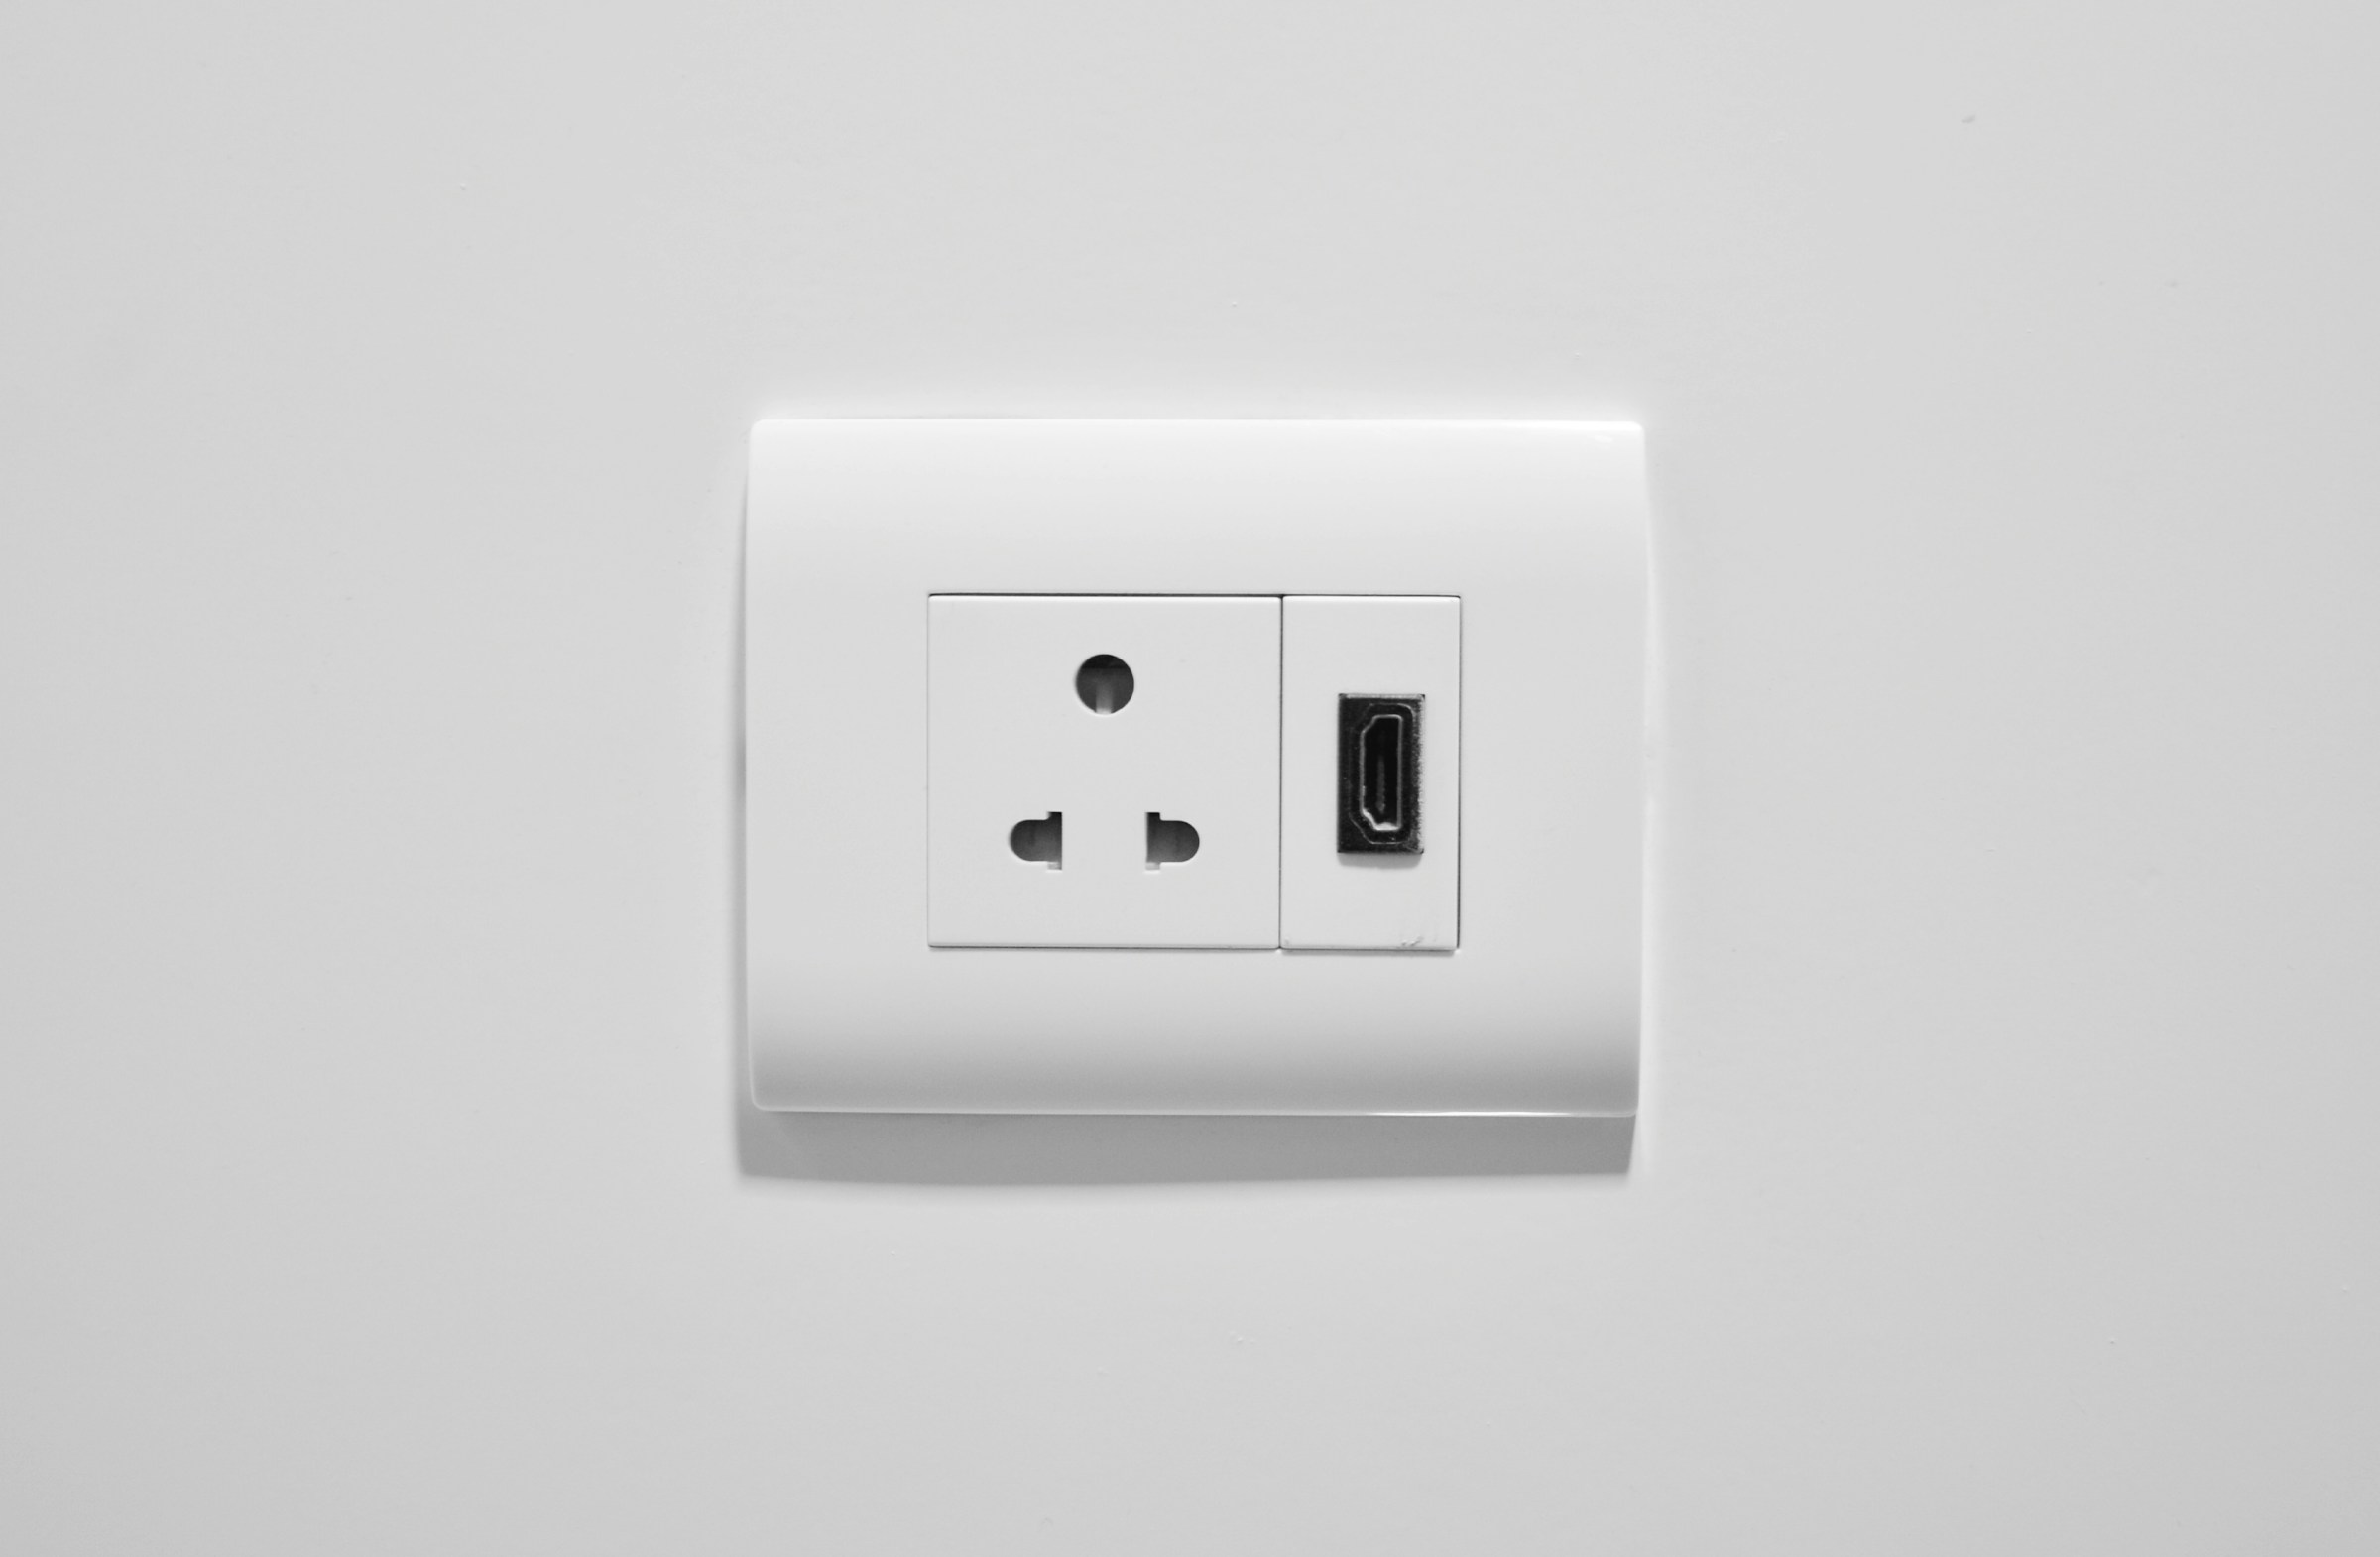 A white wall outlet with two USB ports, ensuring home safety and facilitating switchboard upgrades.